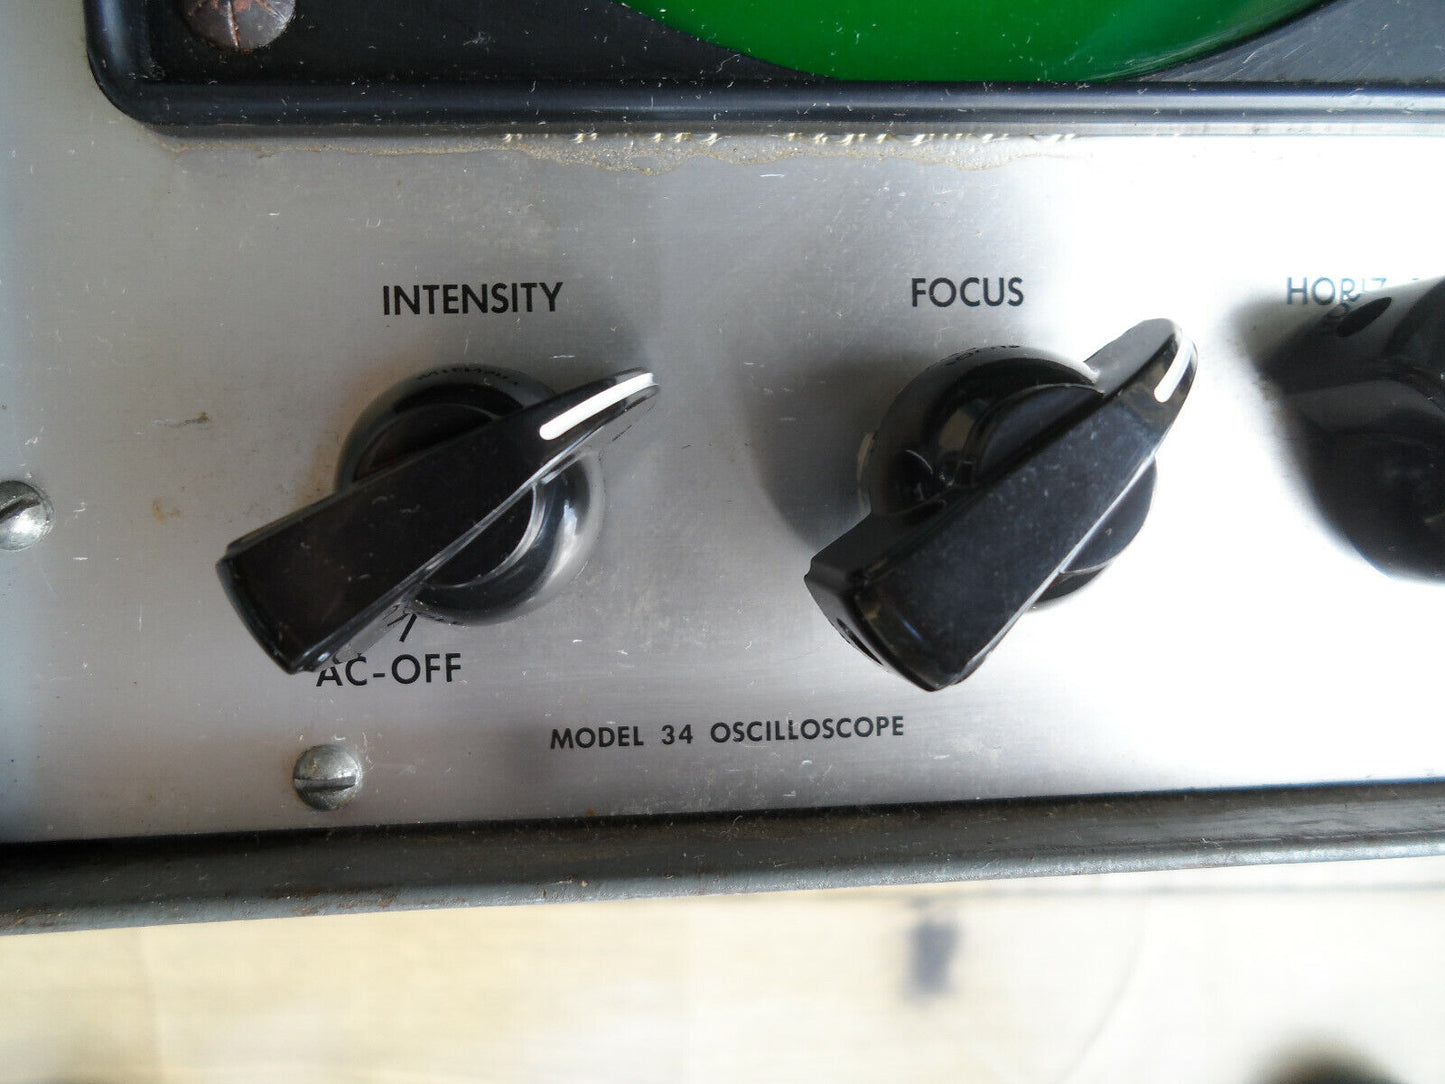 Oscilloscope - Bell & Howell Schools - Not tested